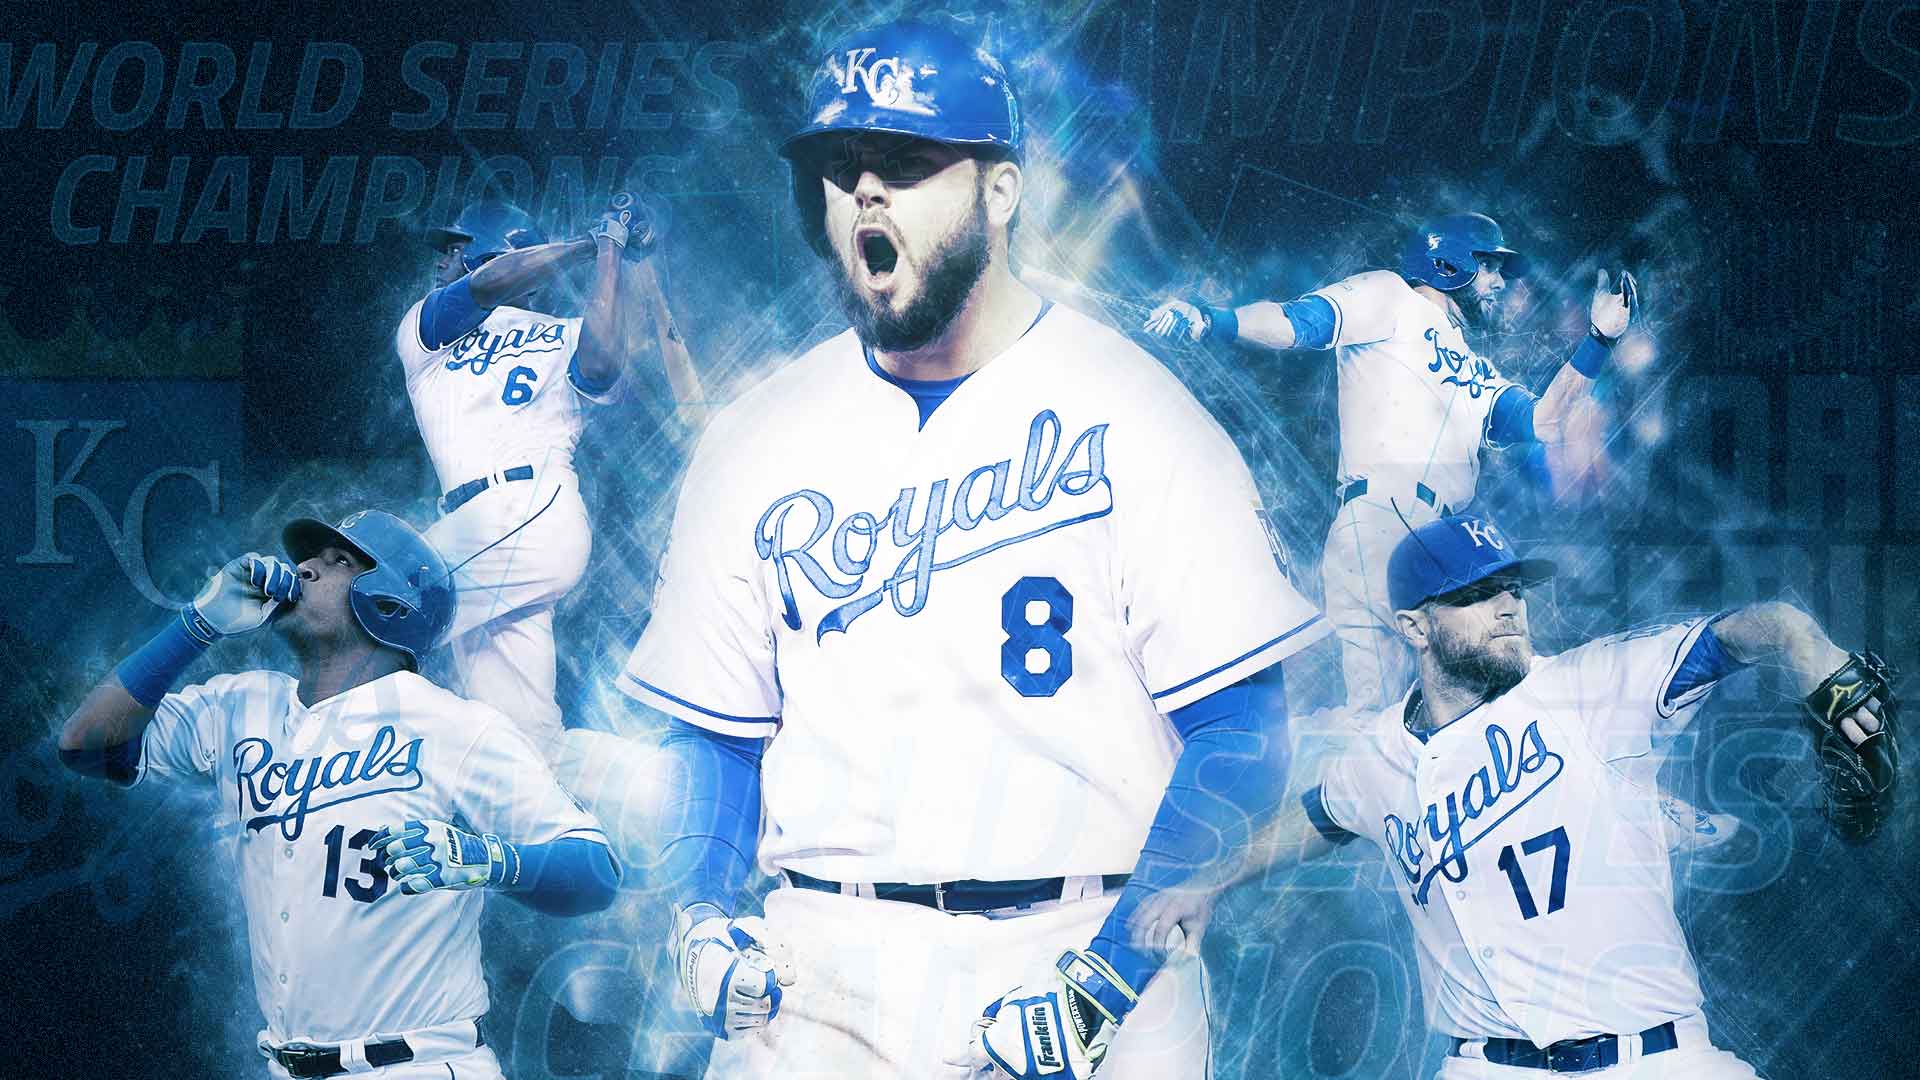 Video: Royals win first MLB title since '85 on Hosmer's mad dash